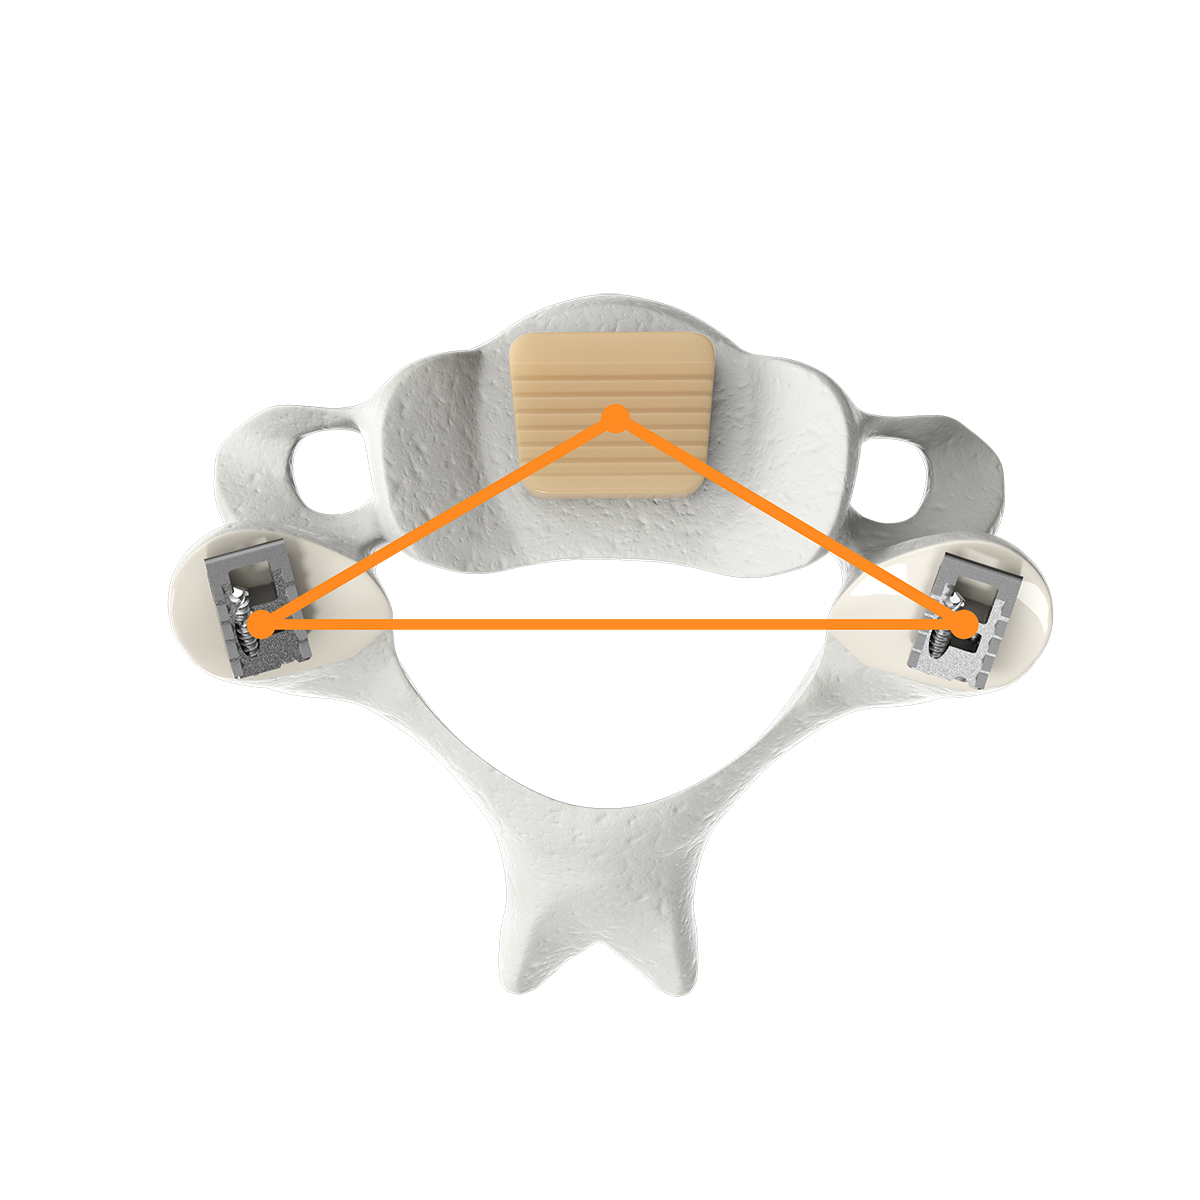 CORUS PCSS forms a Triforce of Stability to stabilize the cervical spine for fusion.